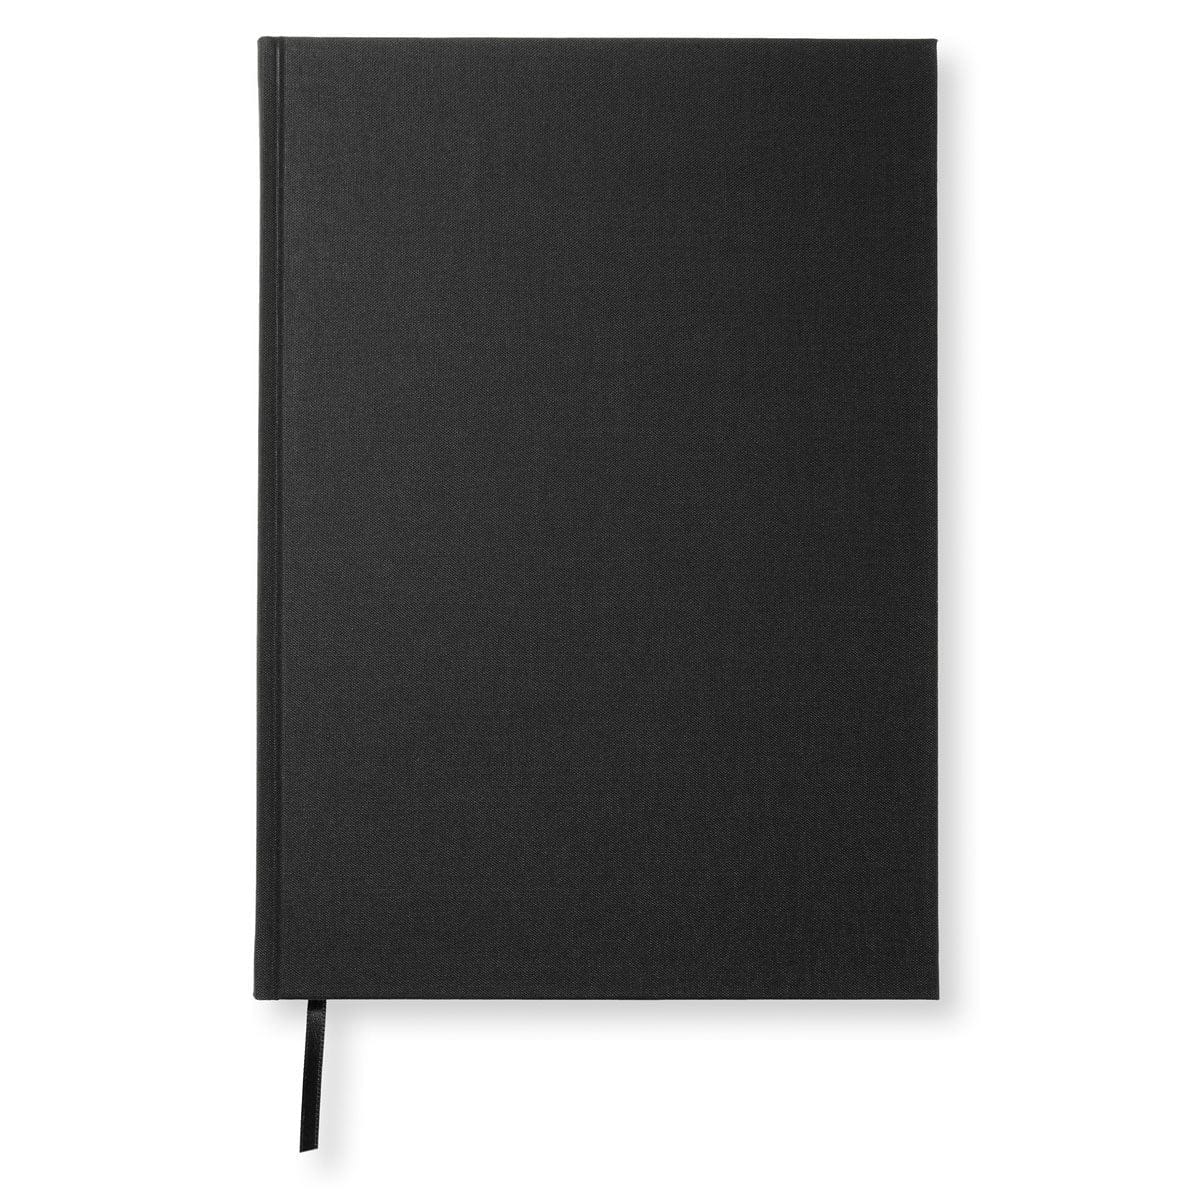 PaperStyle PS NOTEBOOK A4 Plain Black